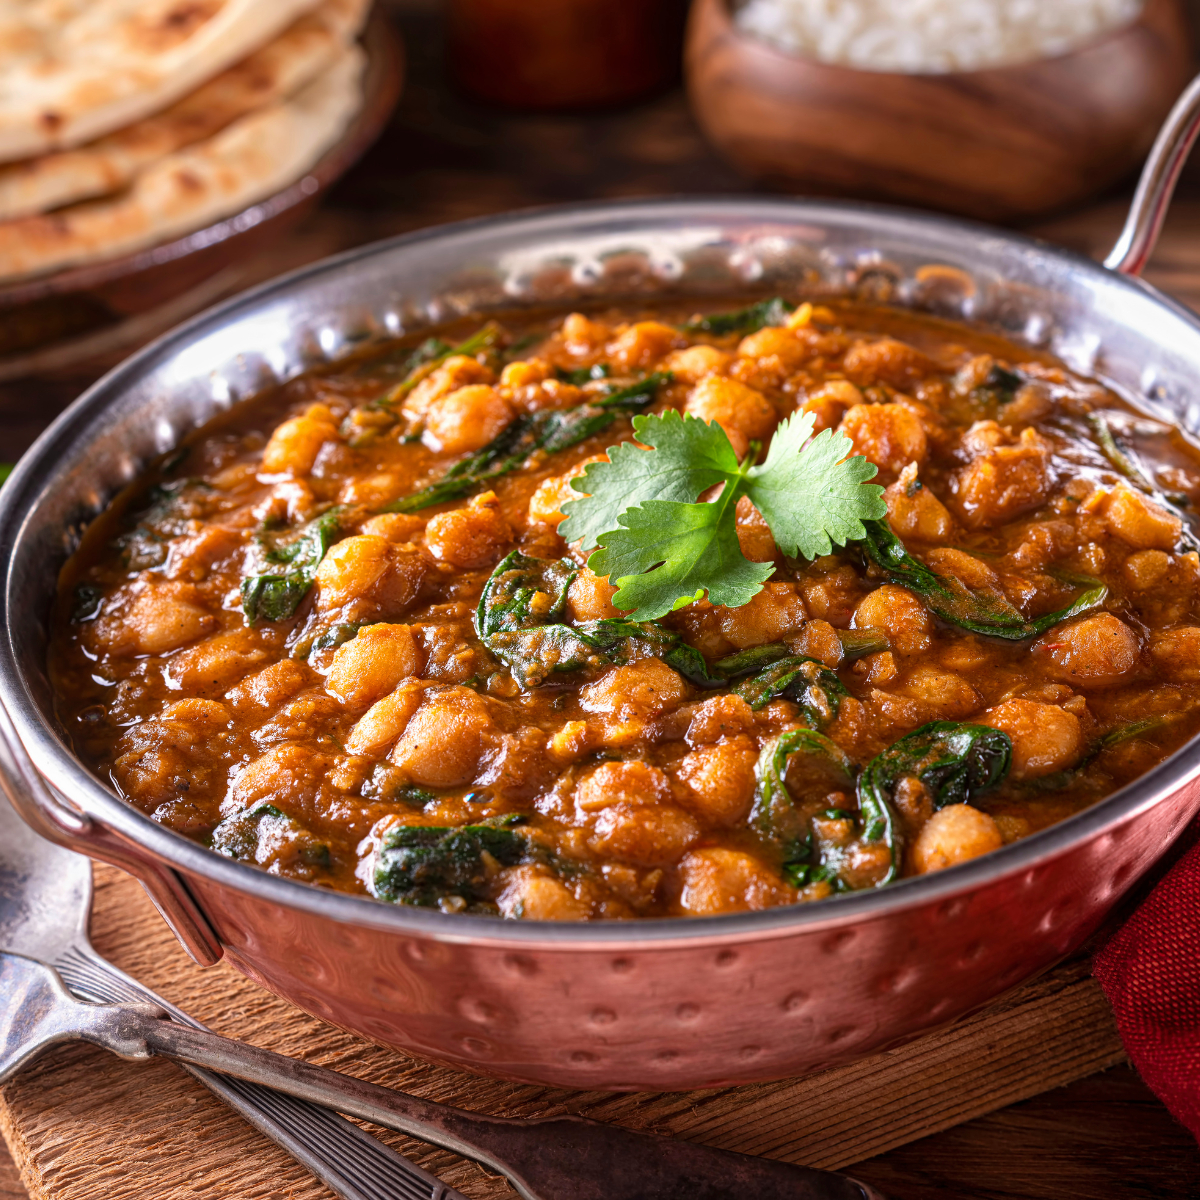 24. Spanish Chickpea and Spinach Stew